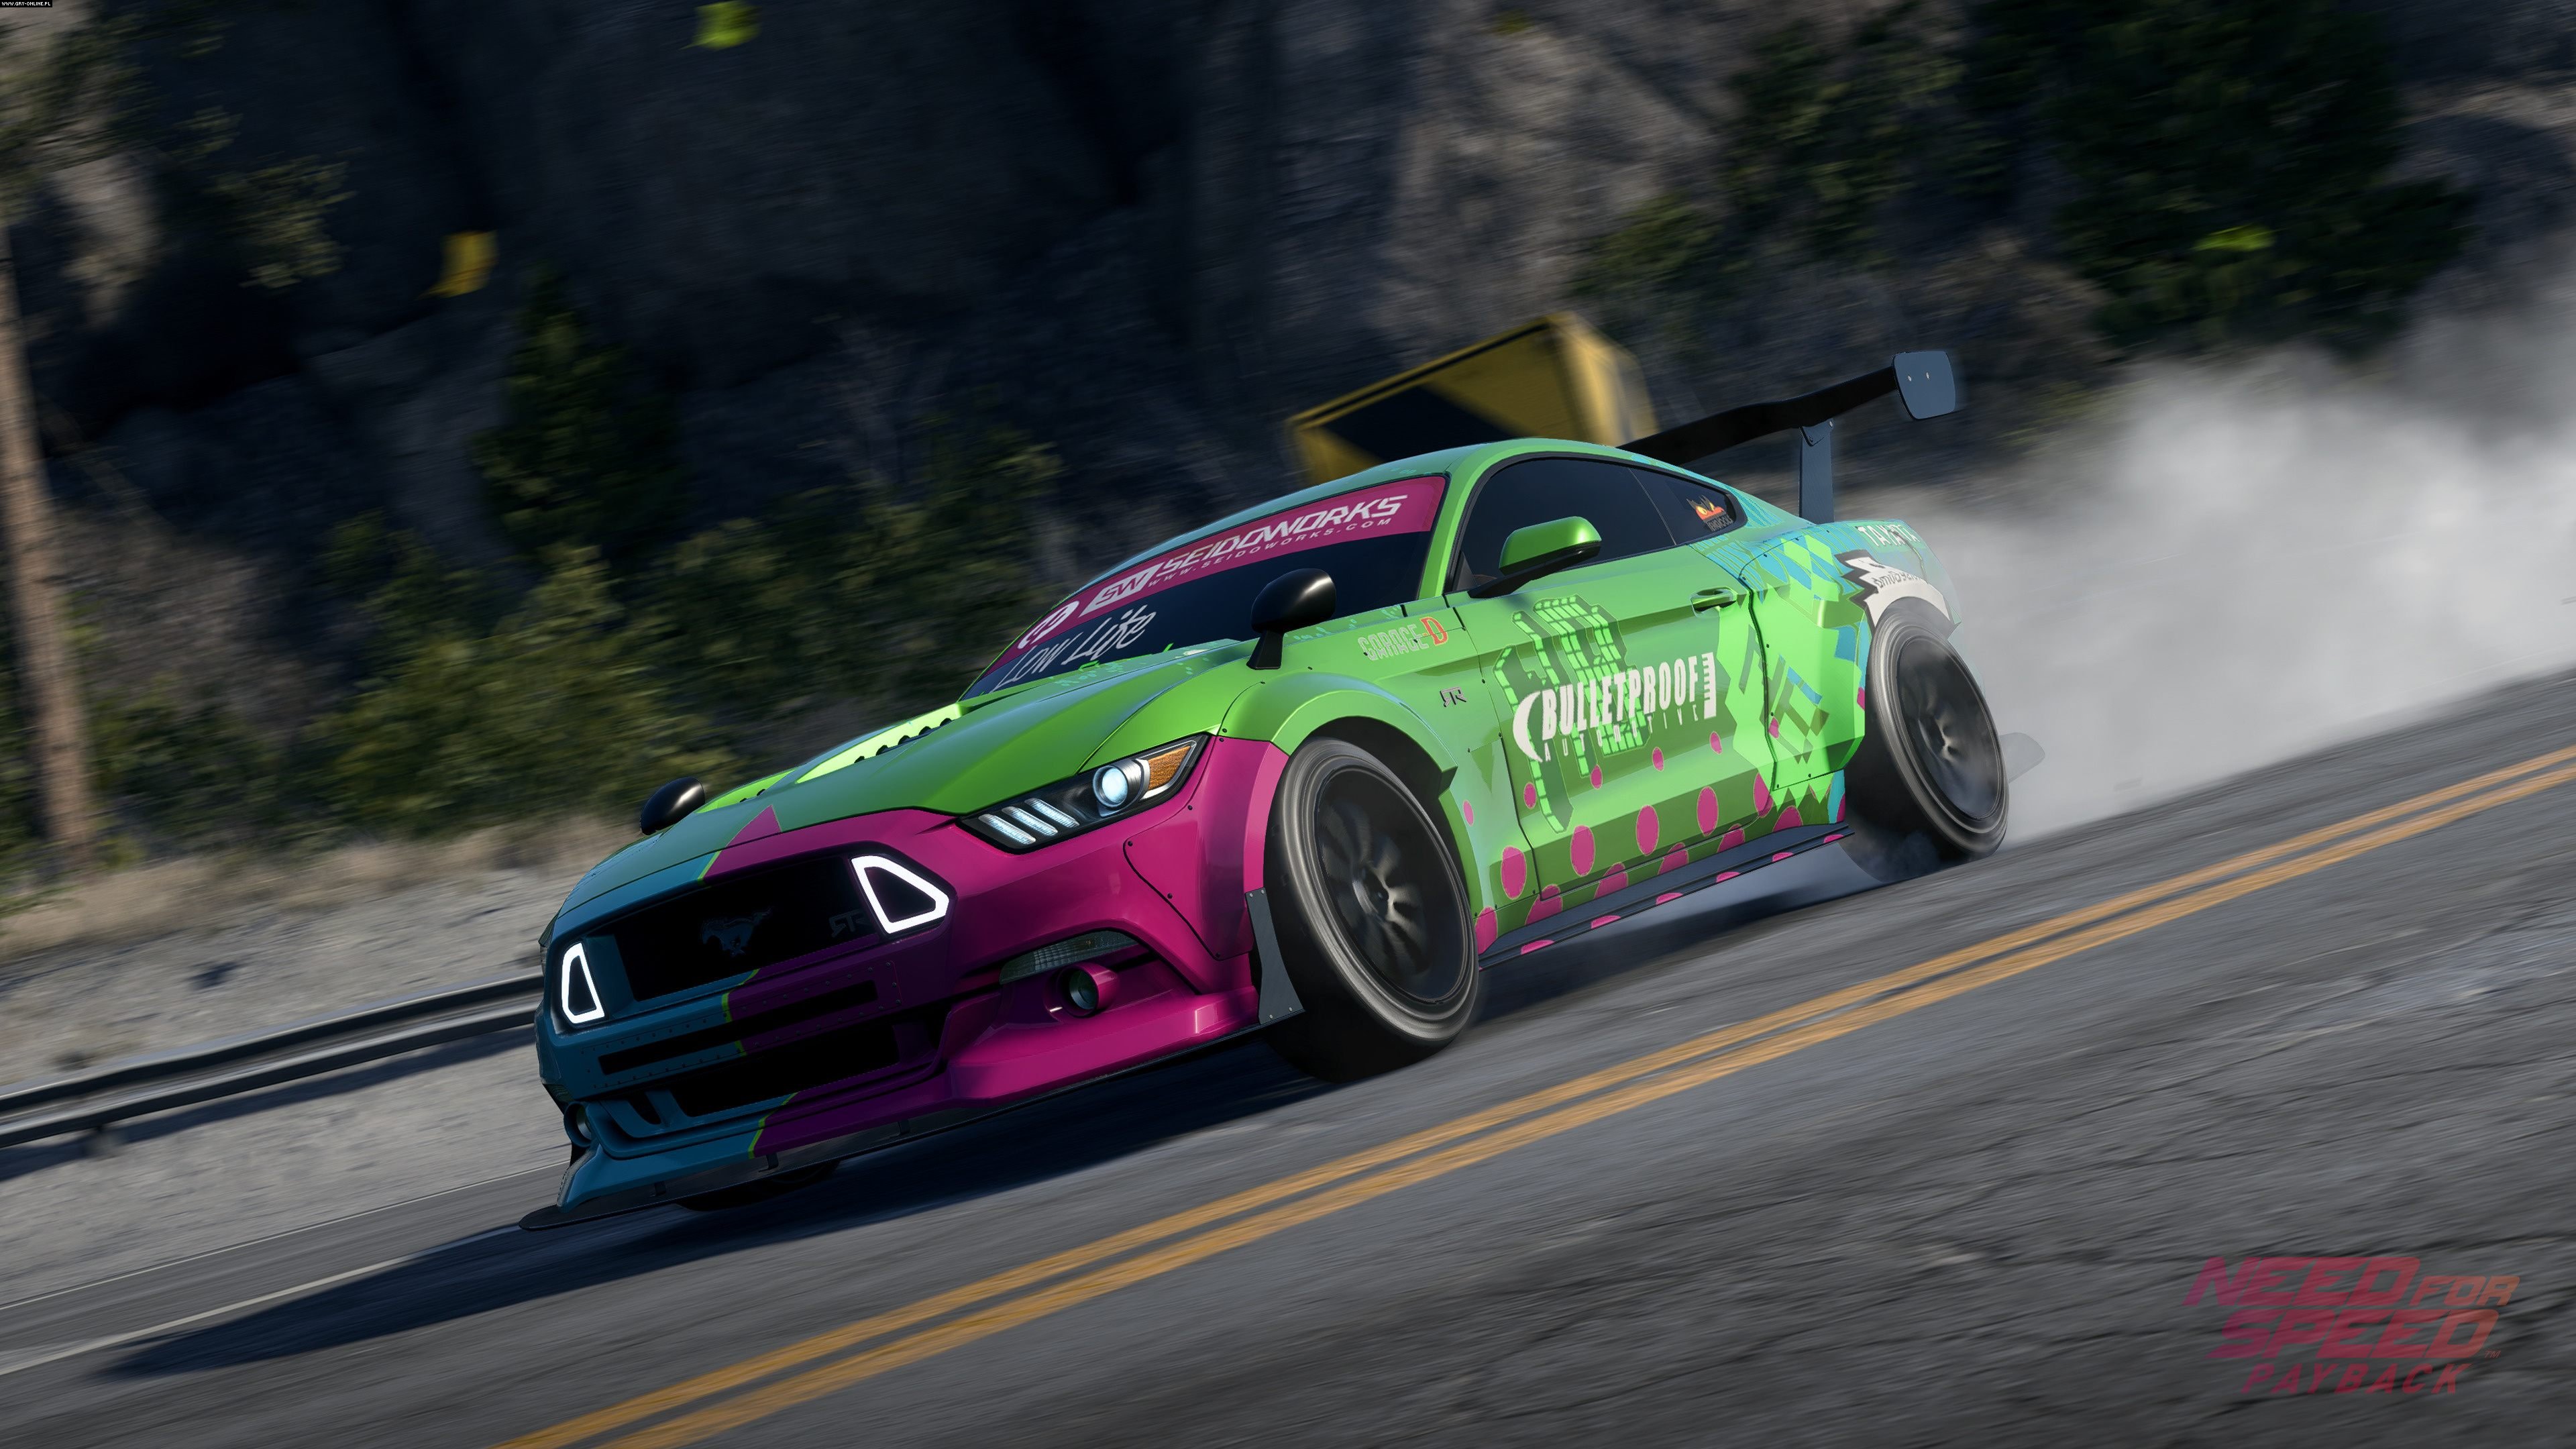 need for speed payback game 8k, hd games, 4k wallpapers on nfs payback wallpapers